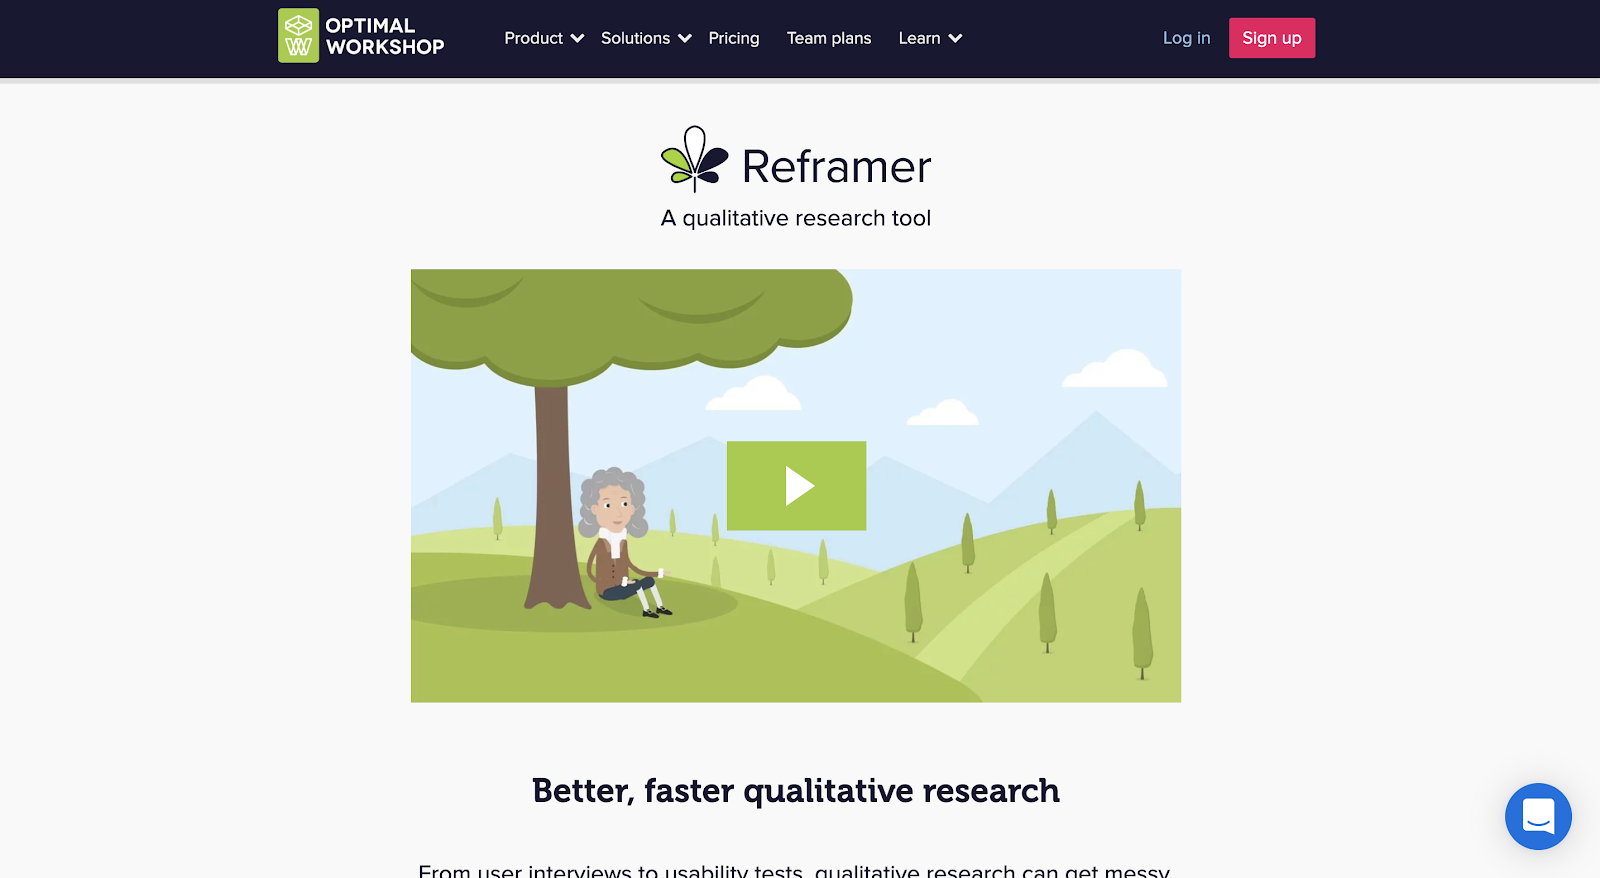 Reframer as a UX research toolbox